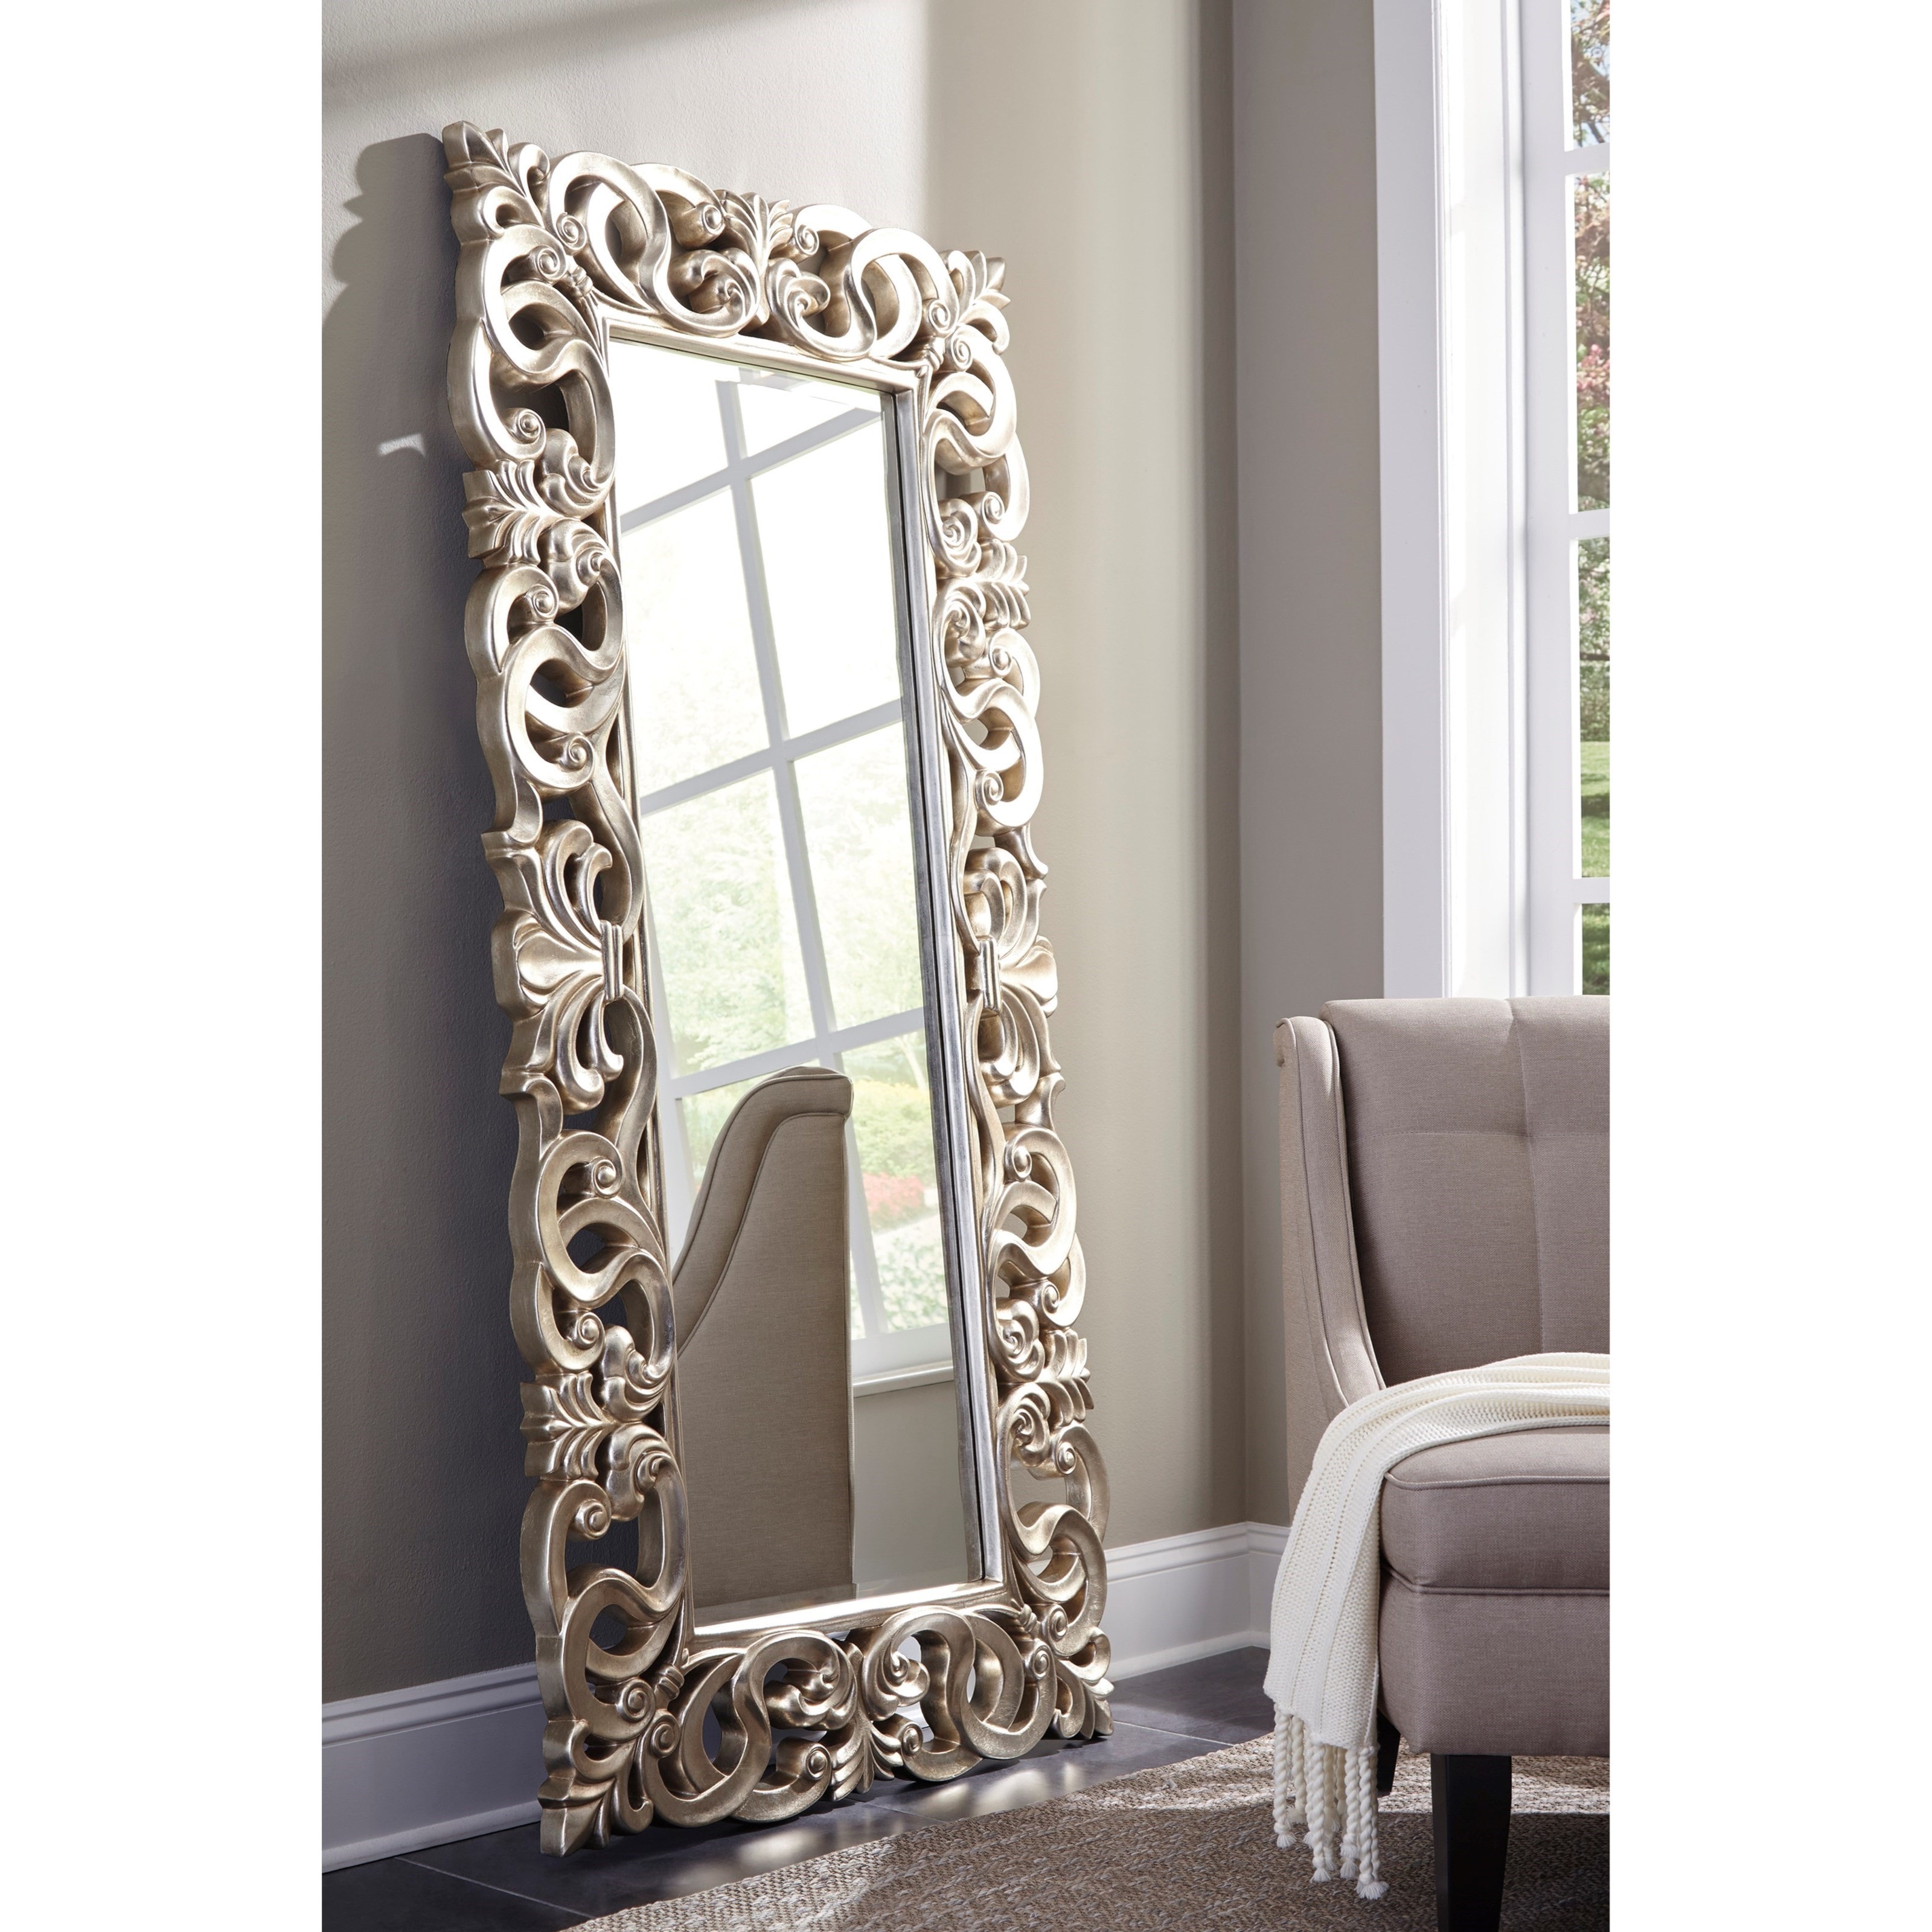 Signature Design by Ashley Accent Mirrors A8010123 Lucia Antique Silver  Finish Accent Mirror Story  Lee Furniture Floor Mirrors